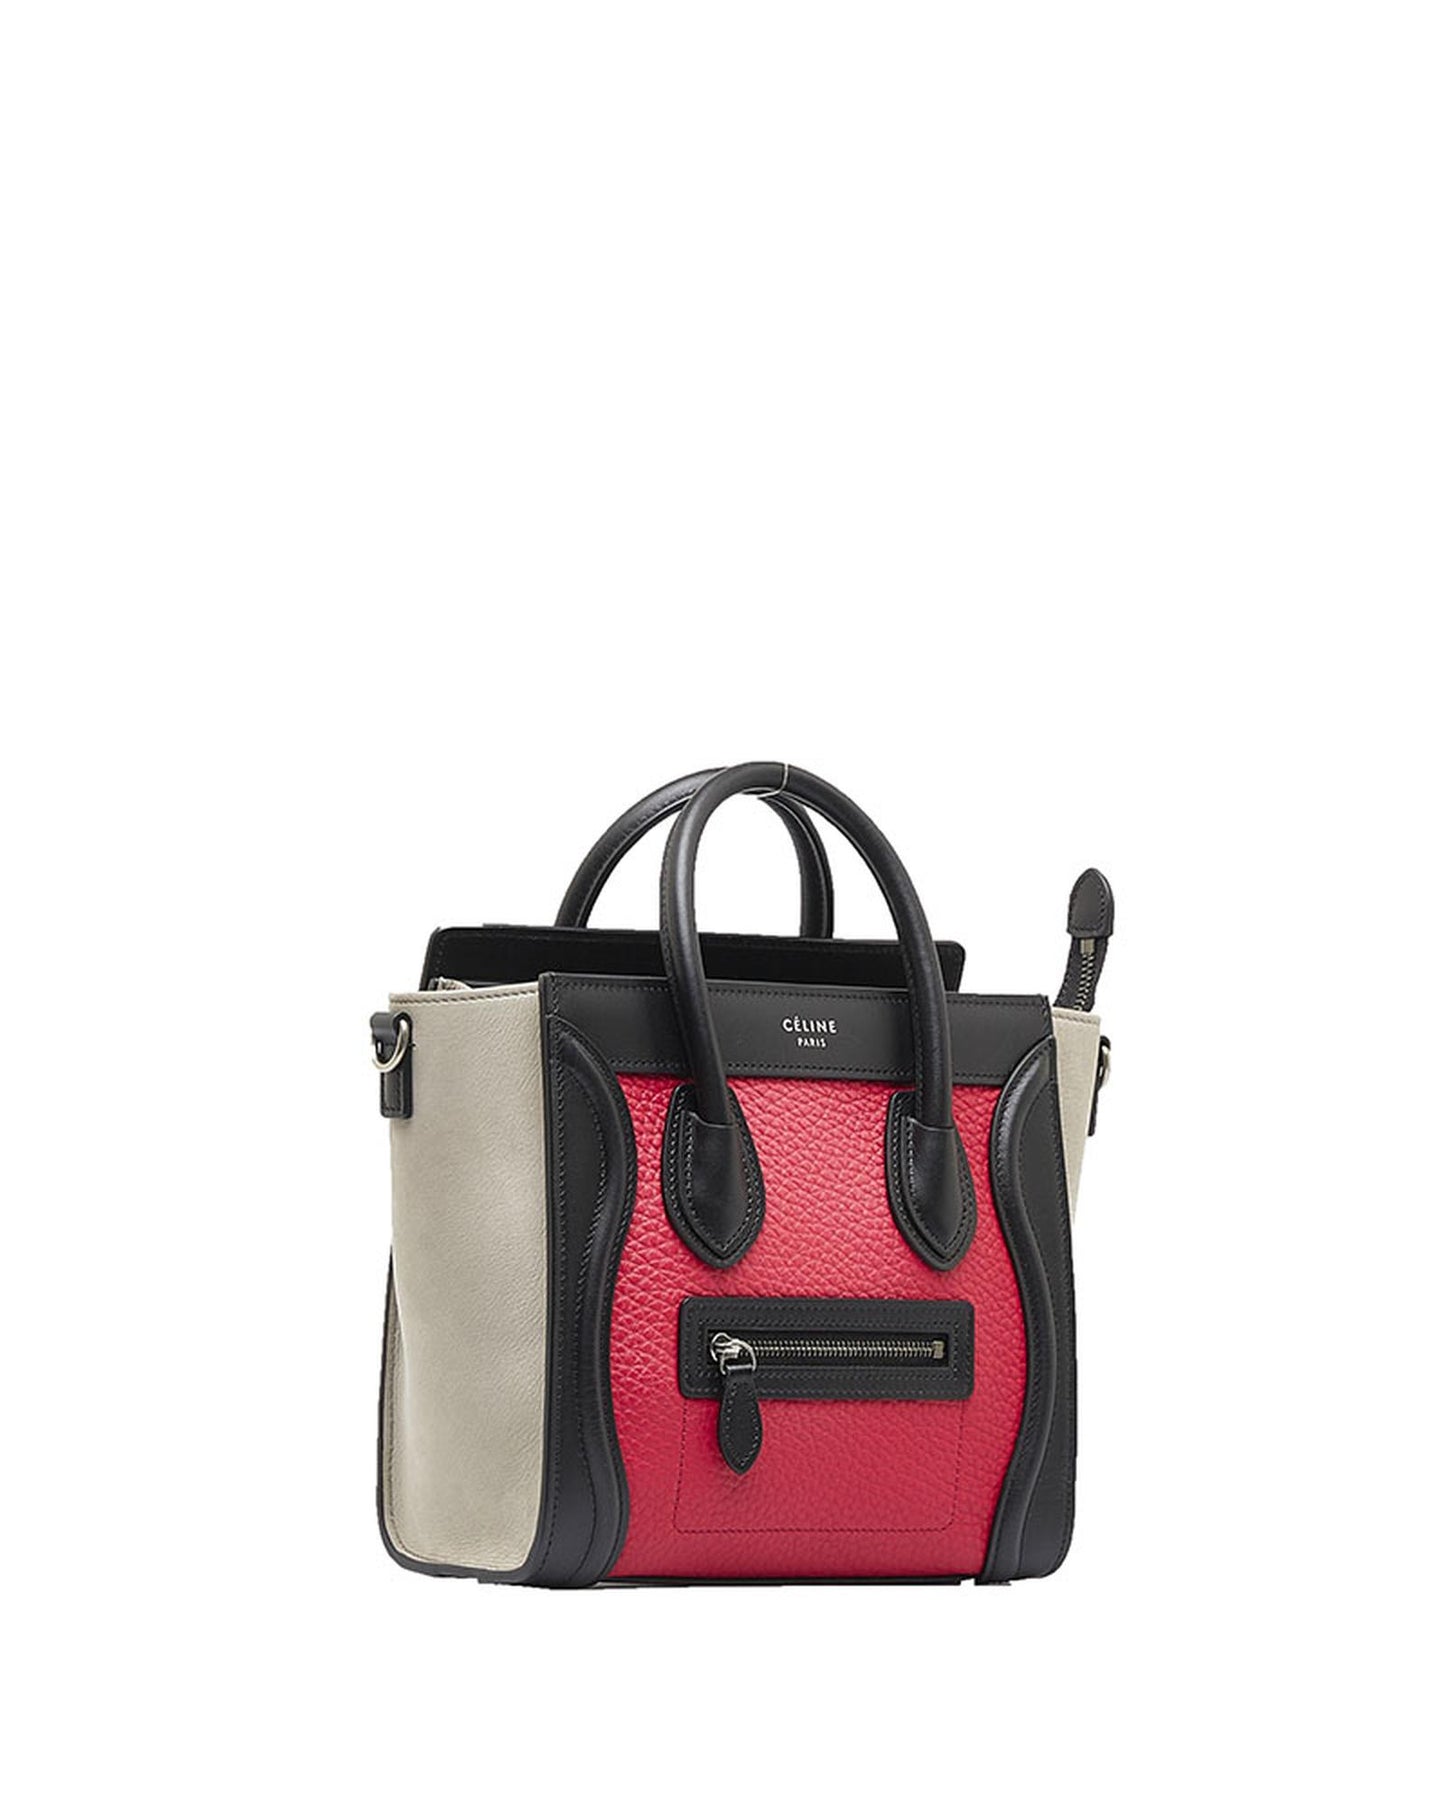 Celine Women's Tricolor Leather Nano Luggage Bag by Celine in Red